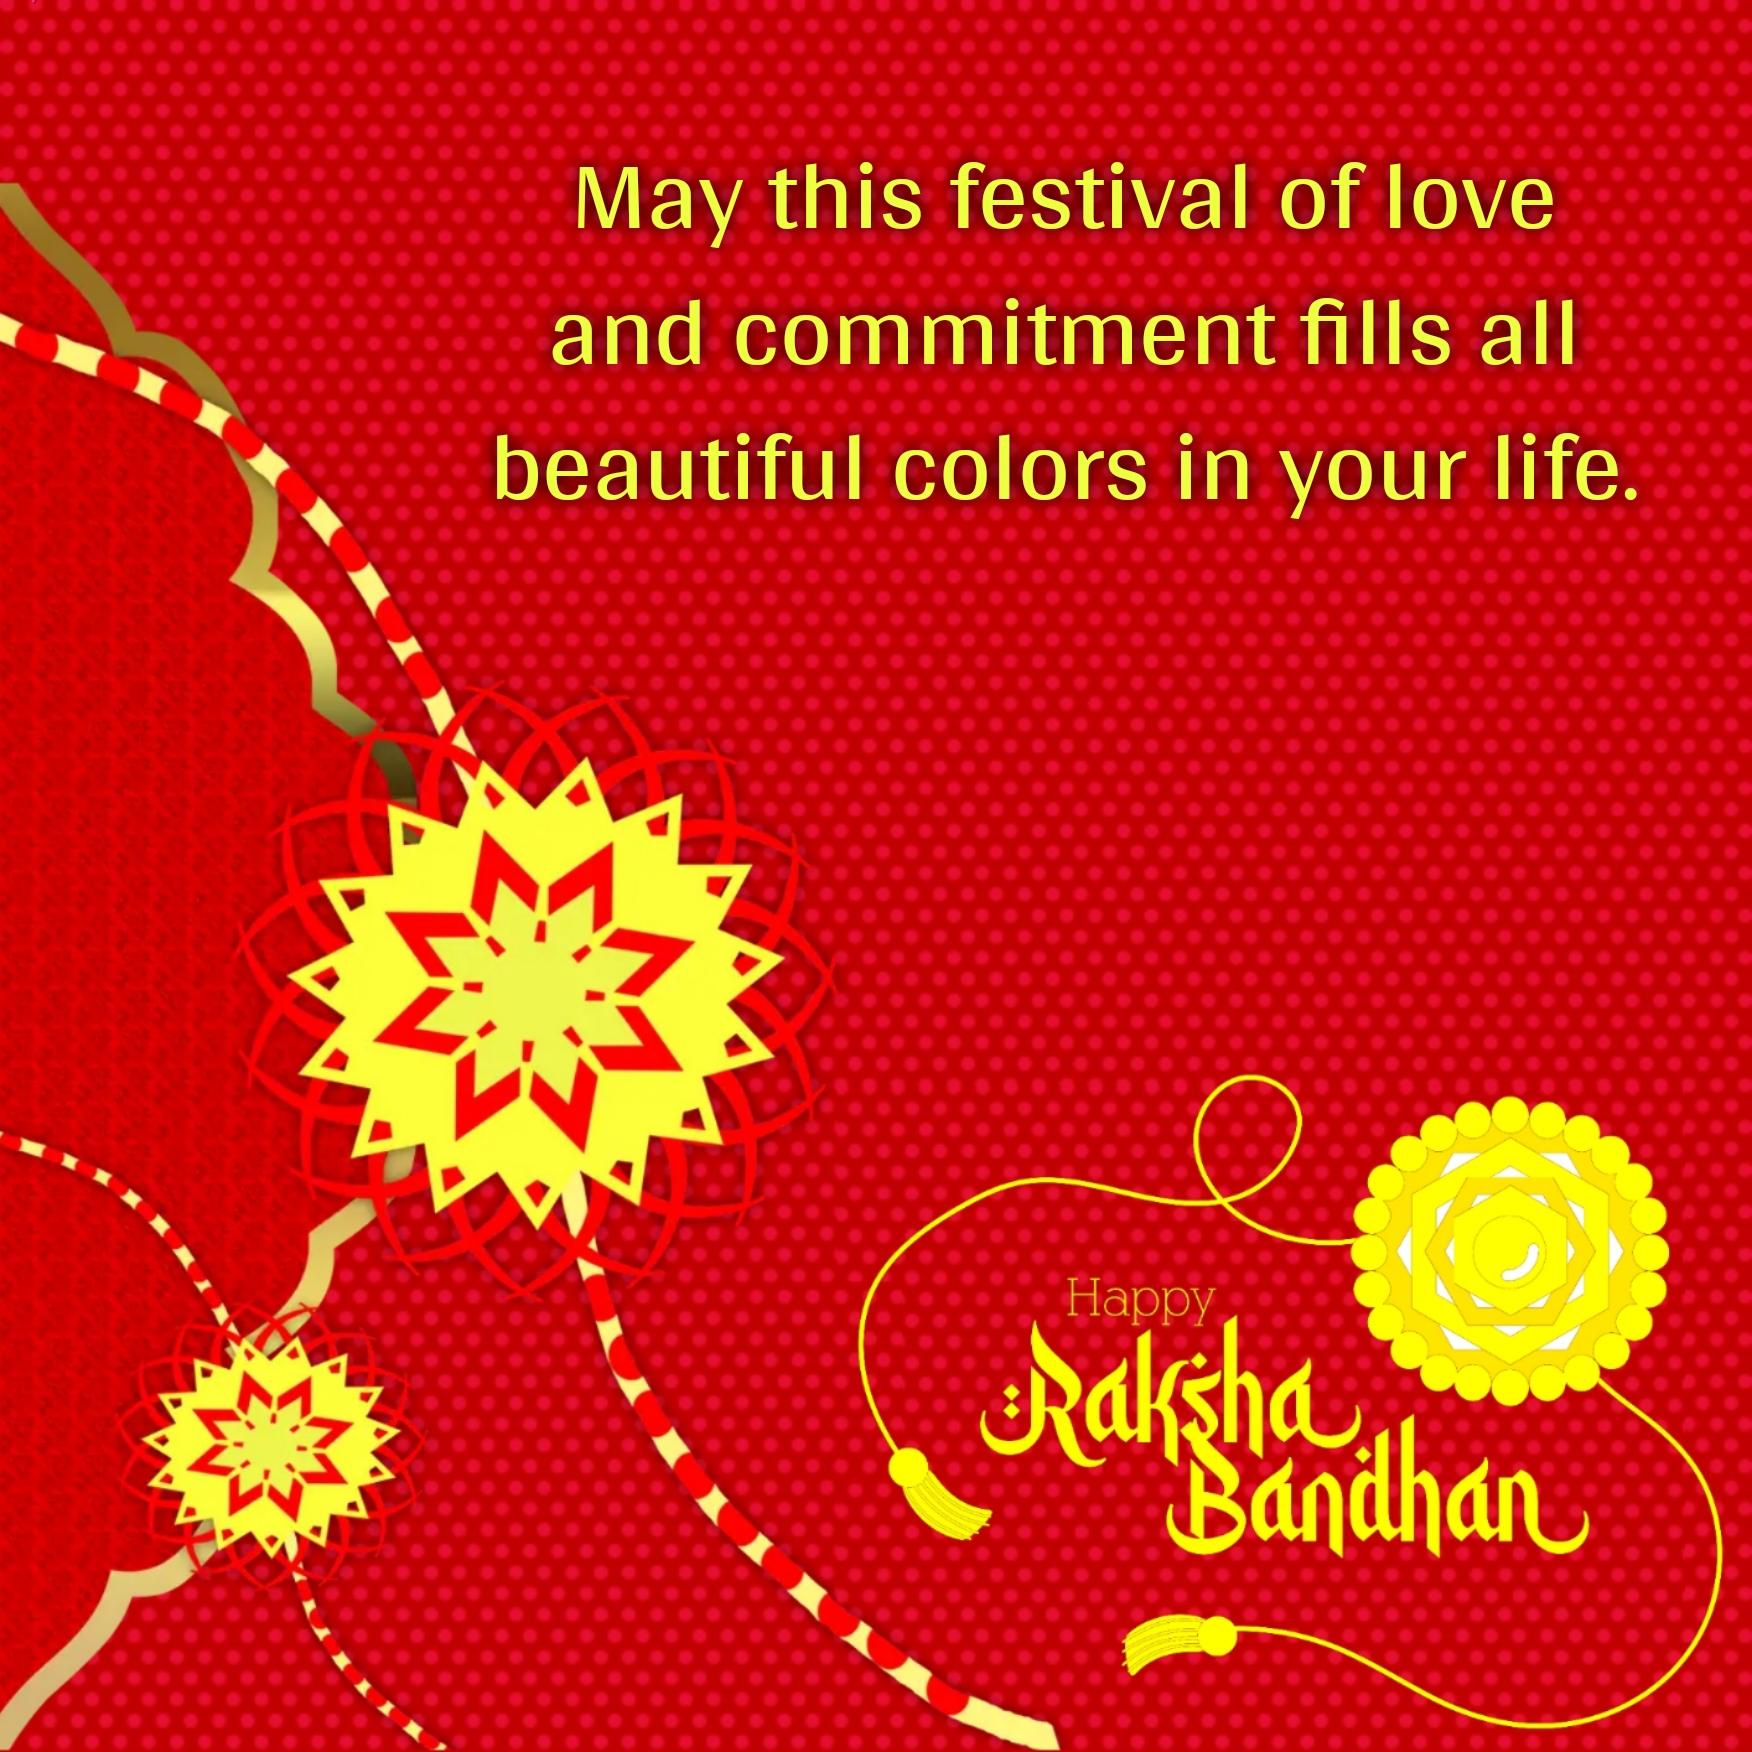 May this festival of love and commitment fills all beautiful colors